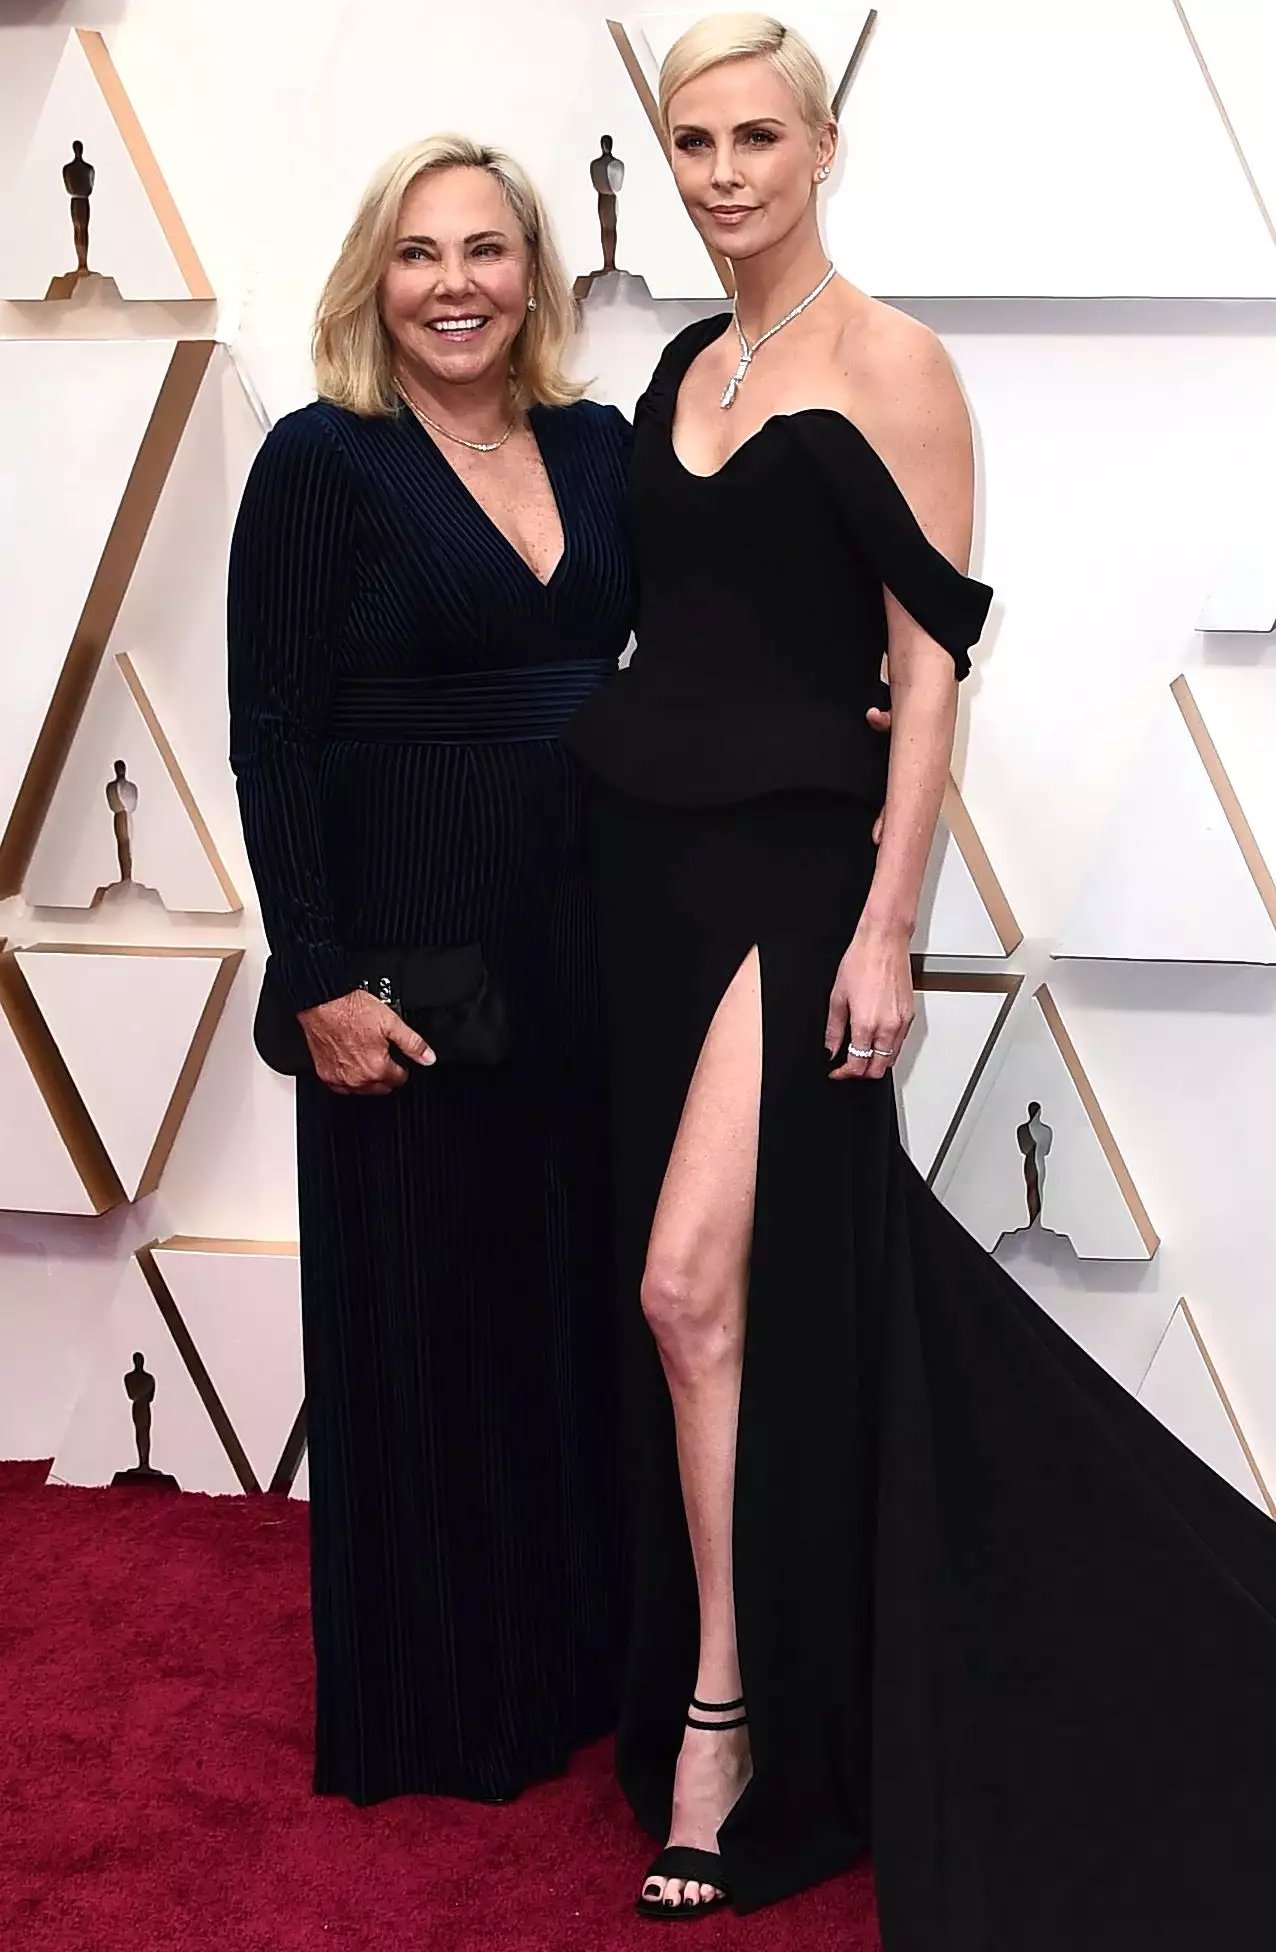 Charlize Theron with her mother Gerda